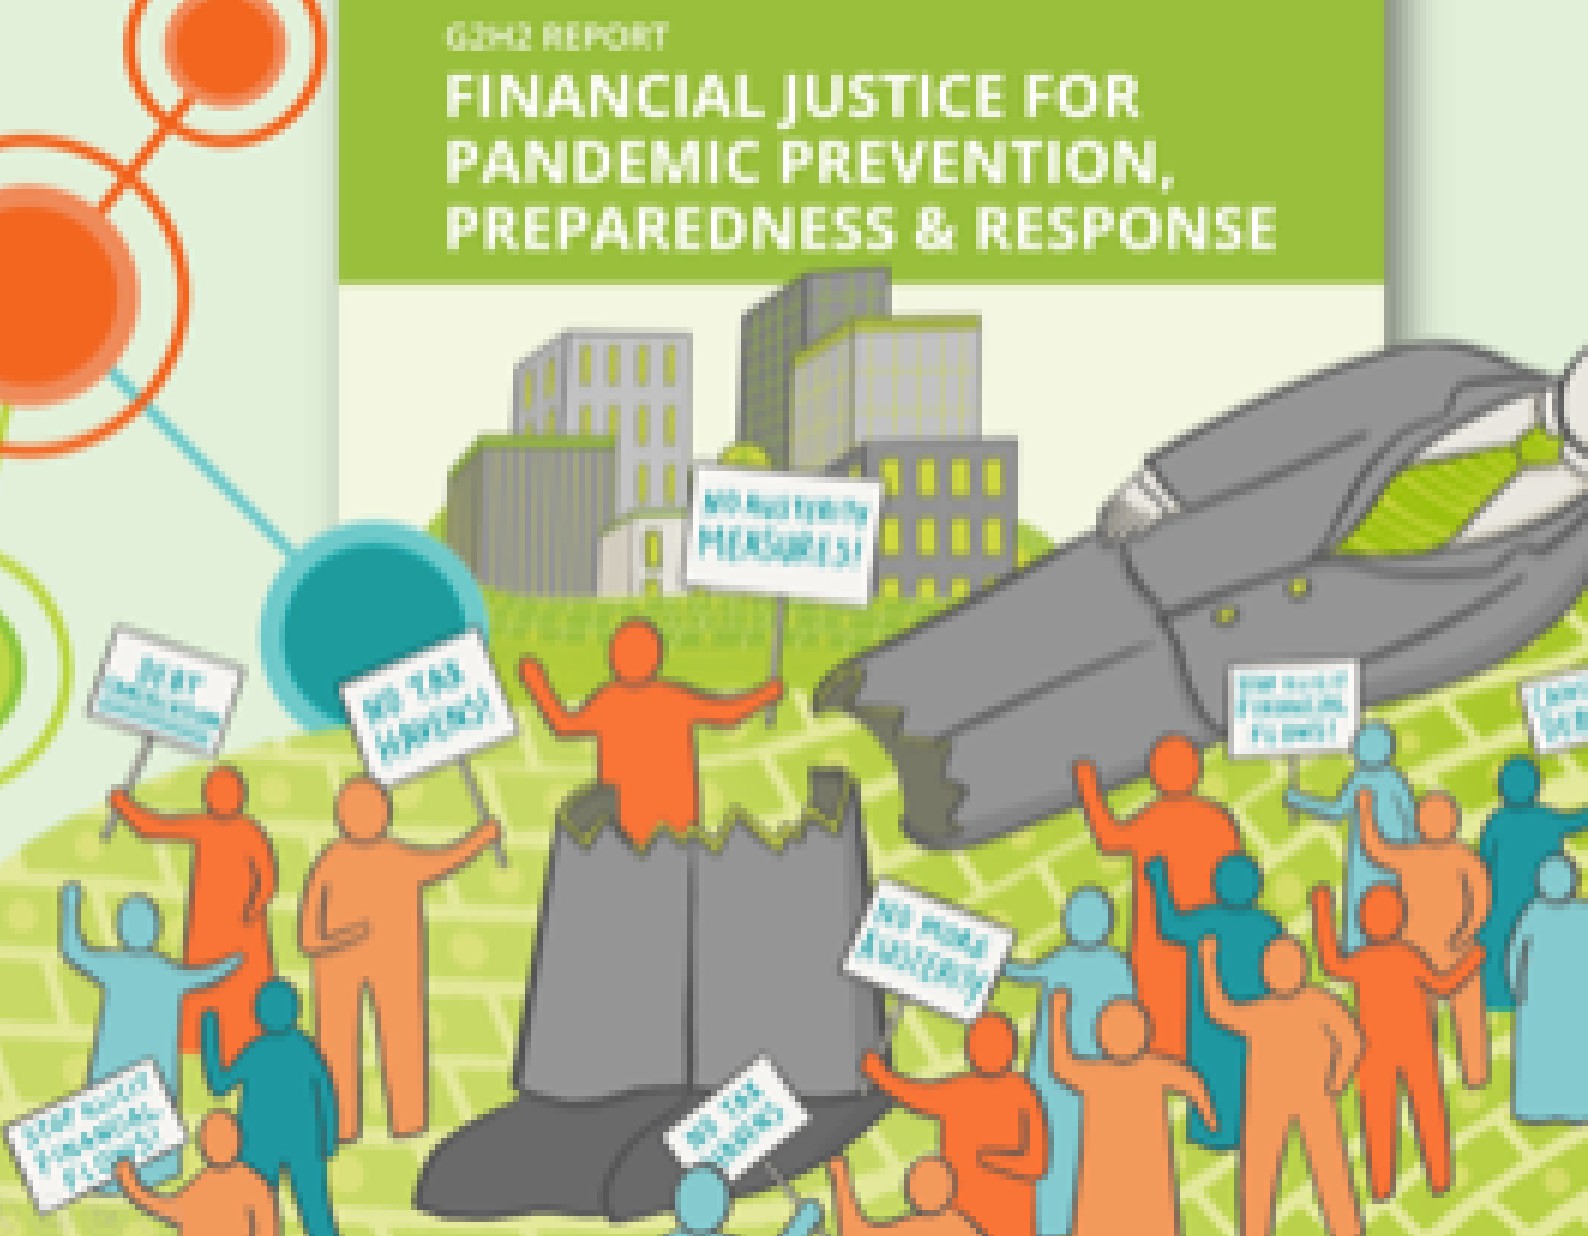 G2H2 Financial justice report